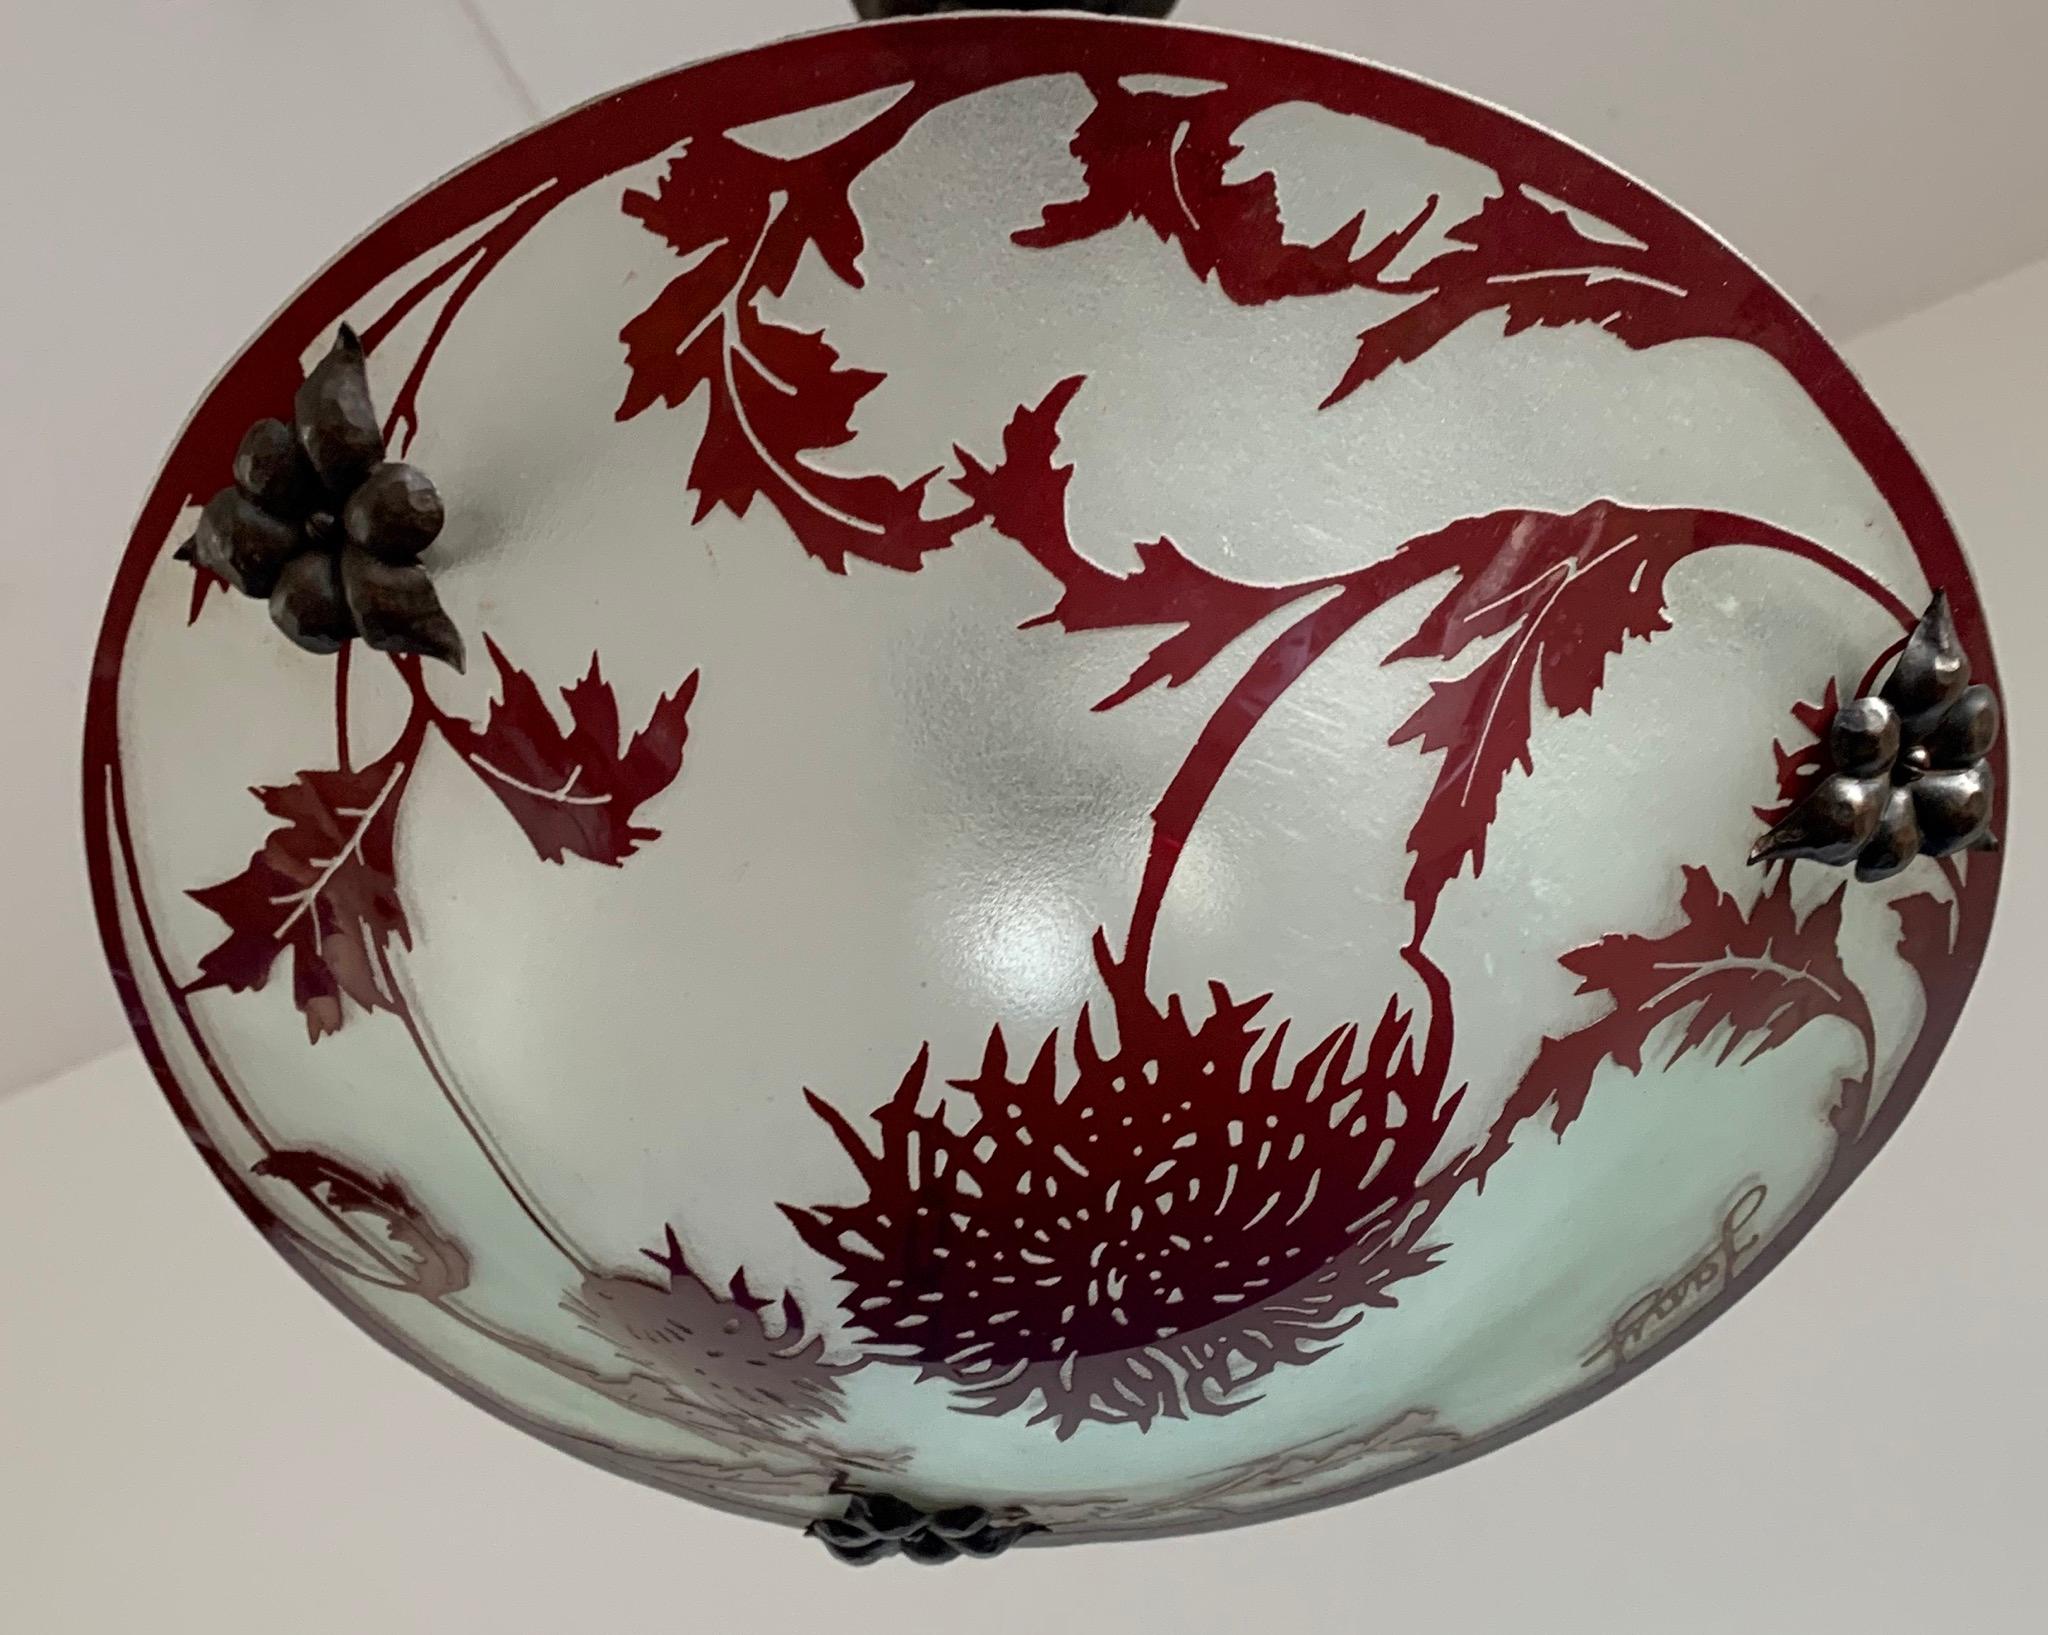 Unique and stunning work of lighting art.

If you are passionate about early 20th century decorative art then you will love this one of a kind, art glass light fixture. What you are seeing here is an extremely rare, enameled pendant, signed by